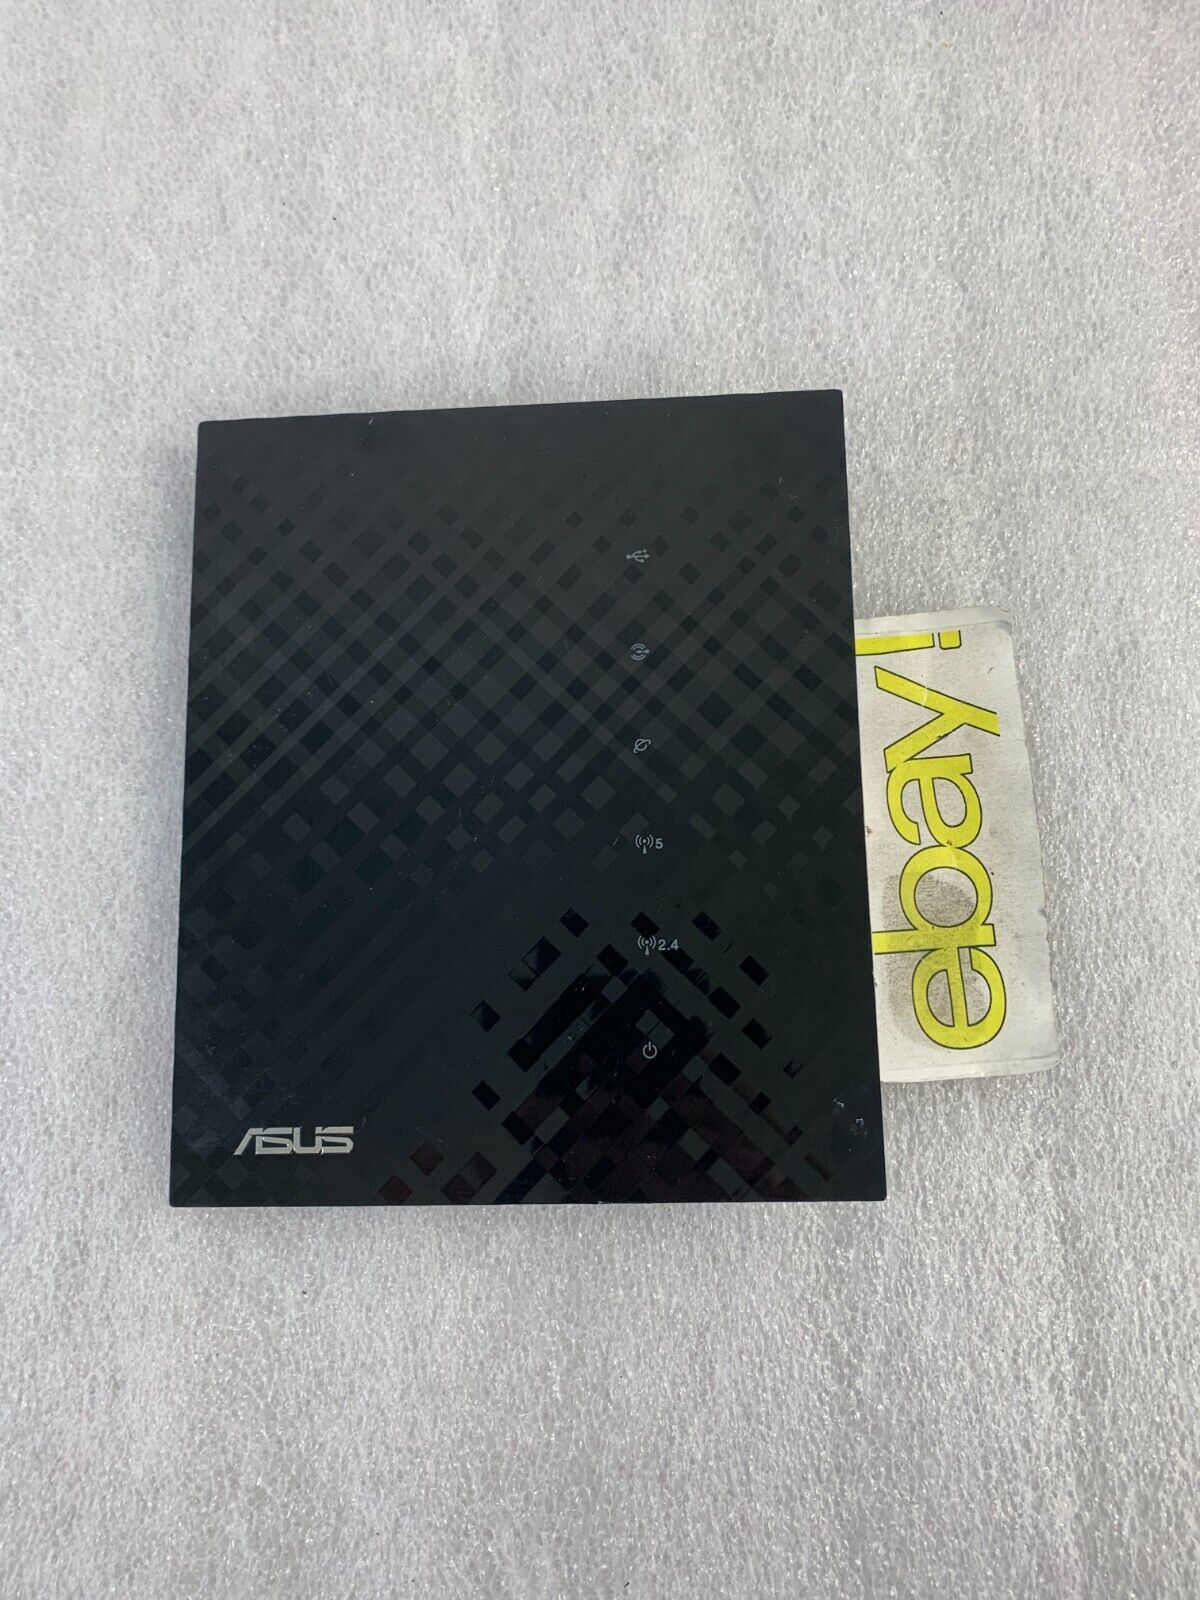 Asus RT-N56U 300 Mbps 4-Port Gigabit Wireless N Router UNIT ONLY 